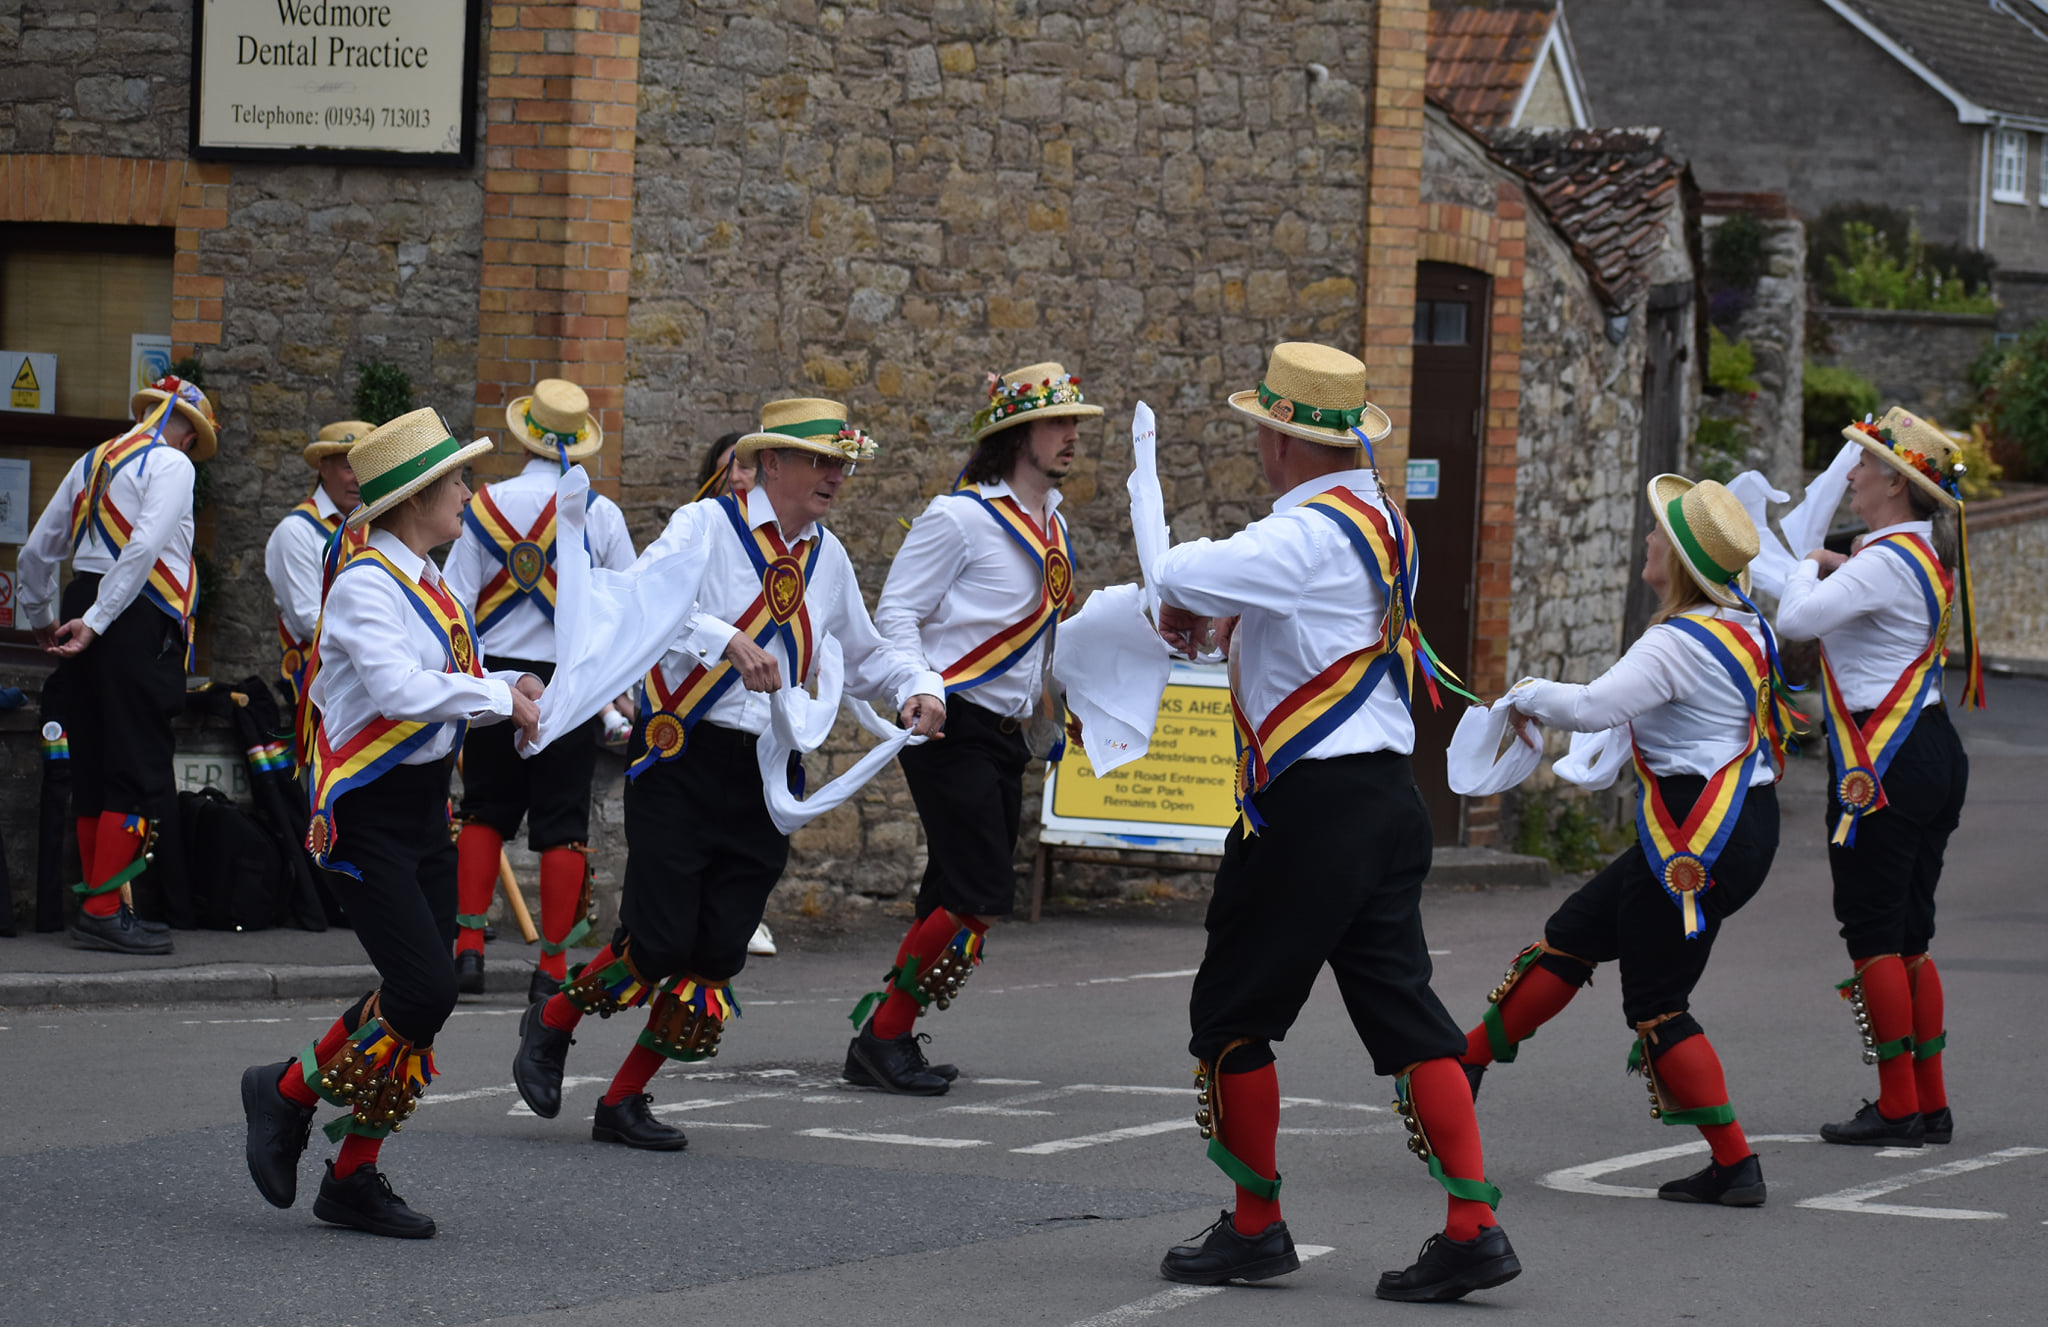 picture of  hankies  at wedmore